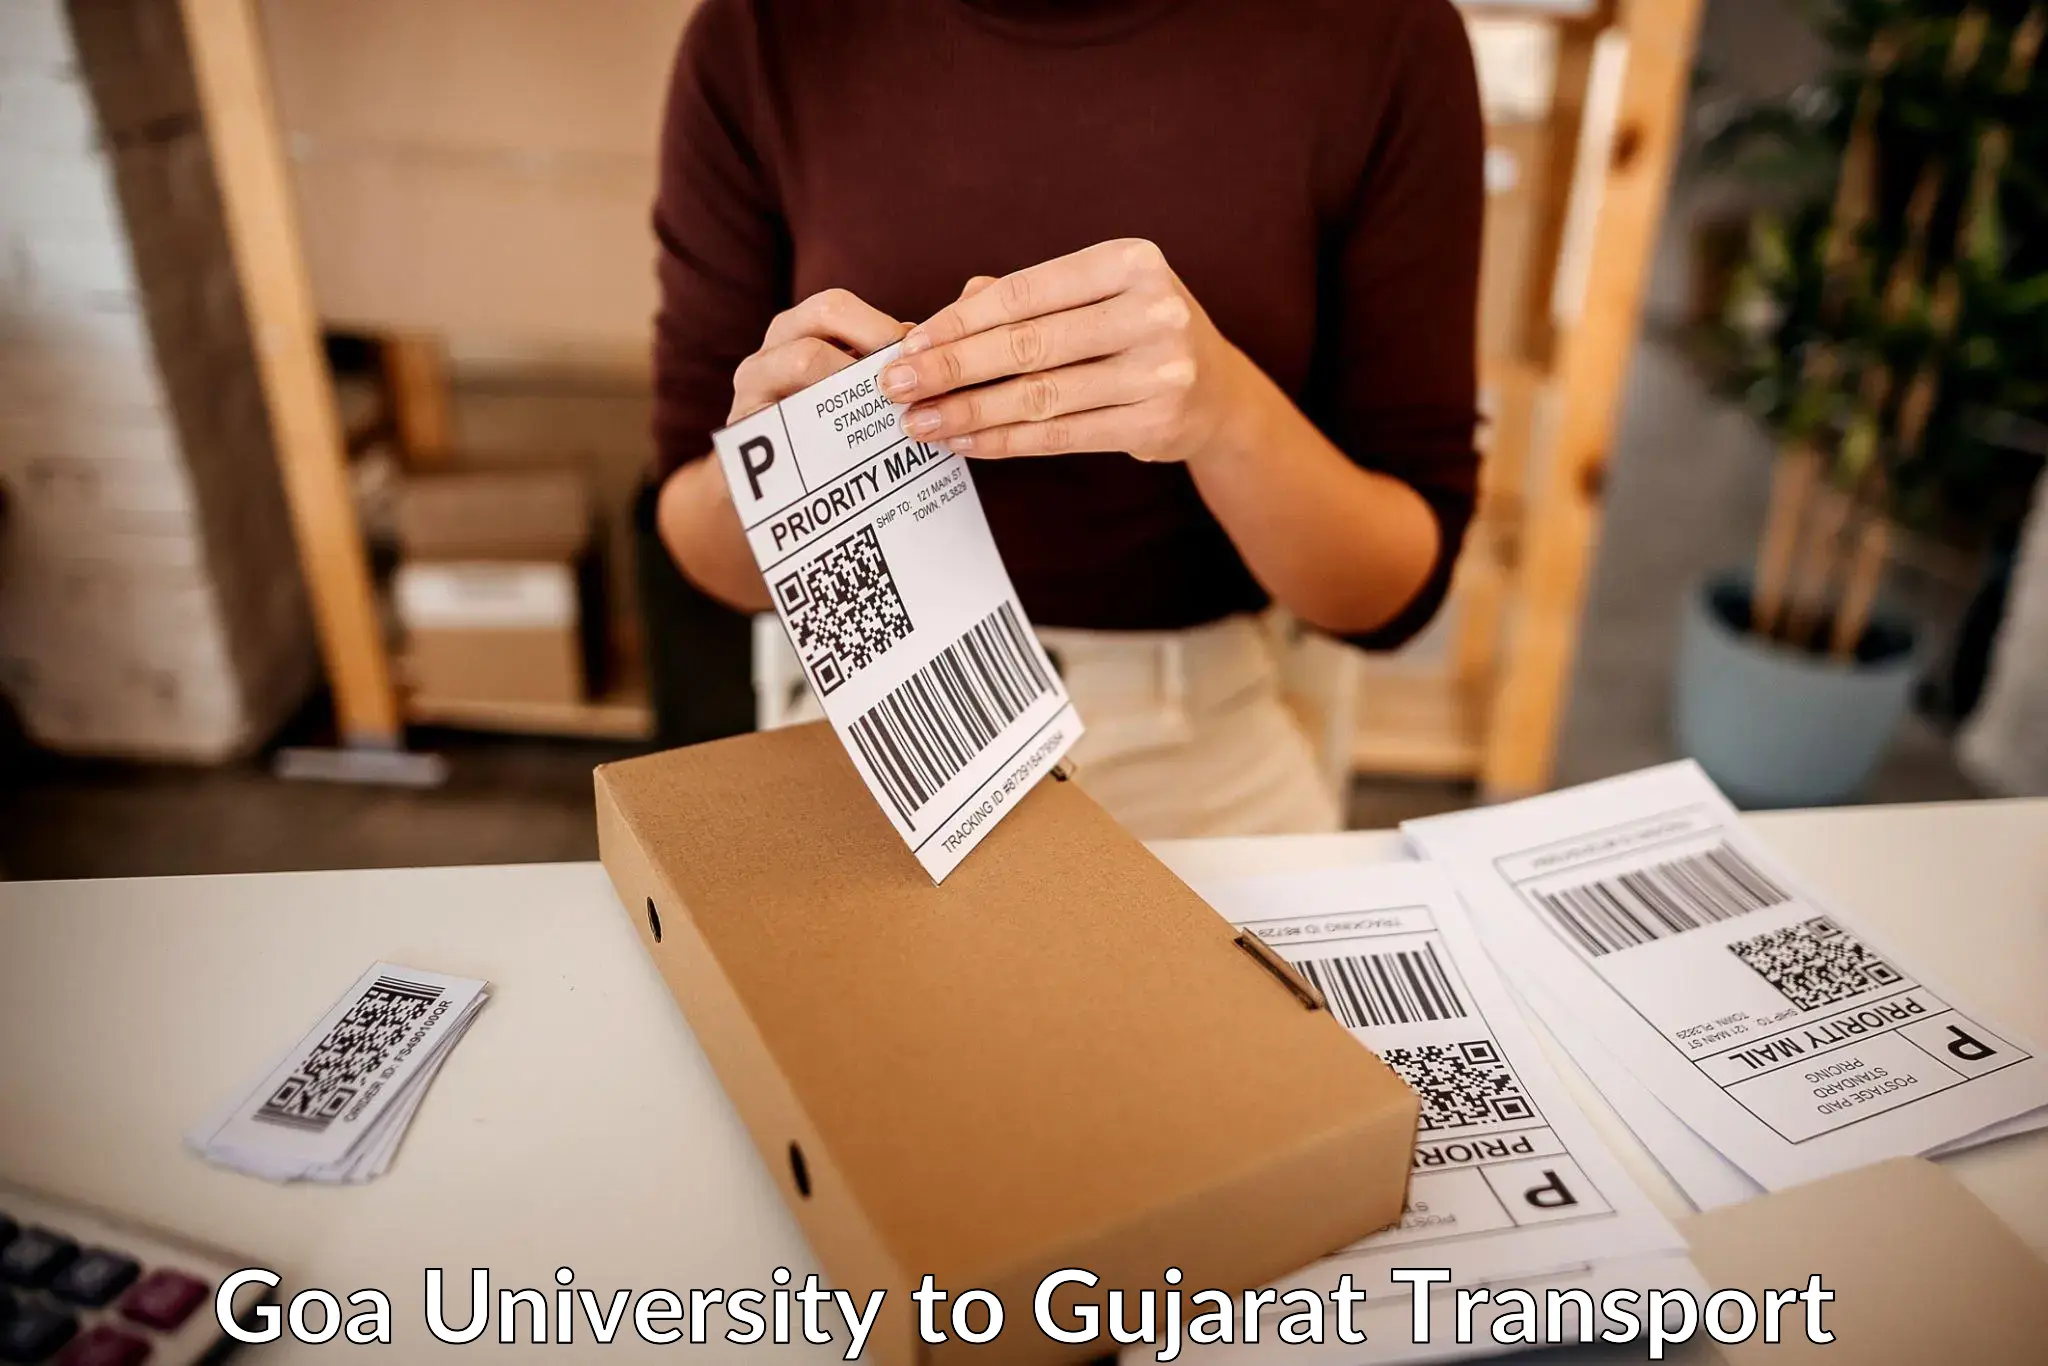 Truck transport companies in India in Goa University to Dhasa